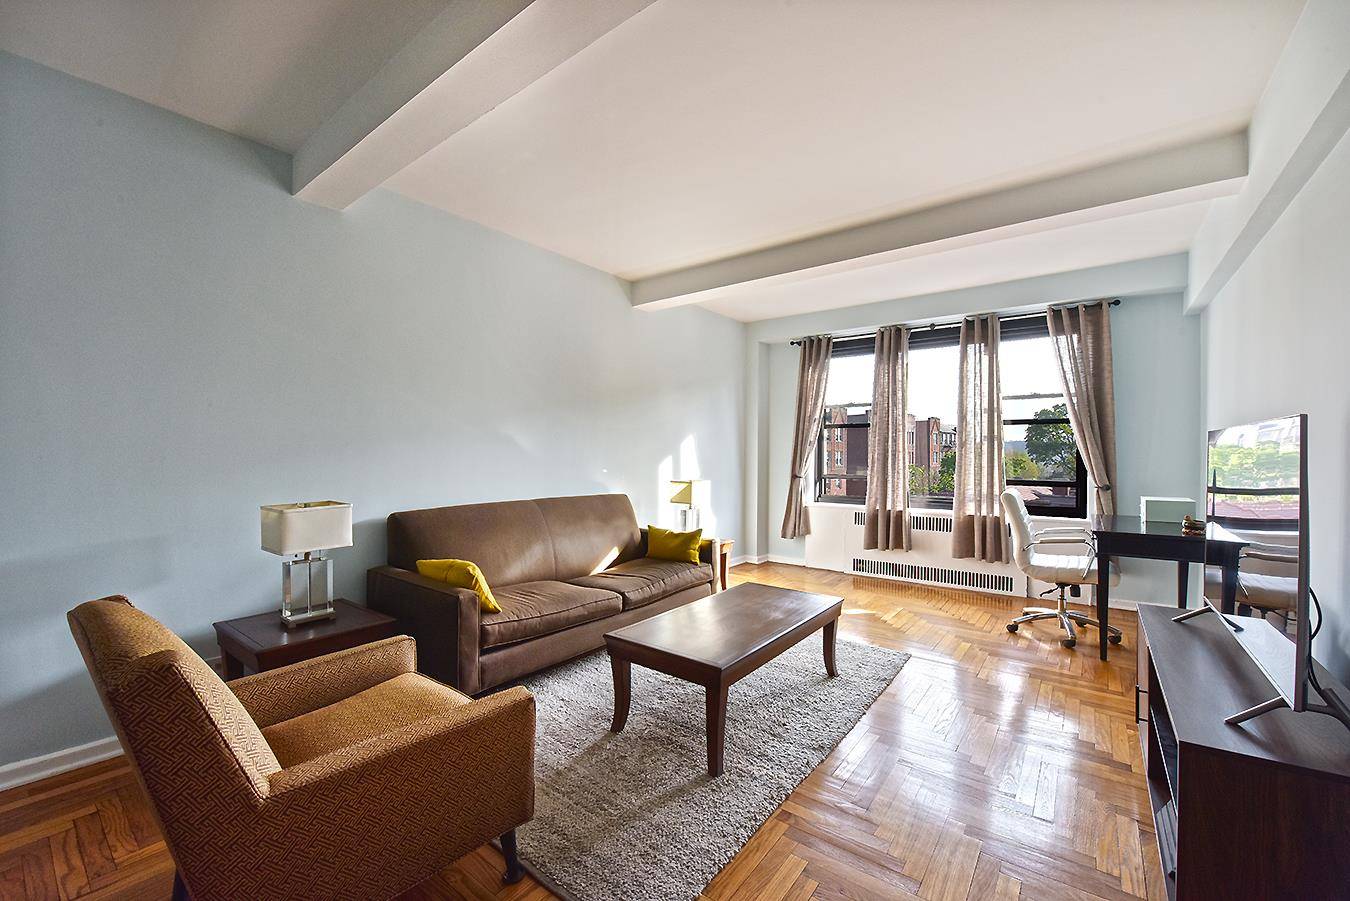 Light and Airy Corner 1BR With Open ViewsLight and airy and nothing for you to do to this very nice one bedroom apartment in Park Terrace Gardens.